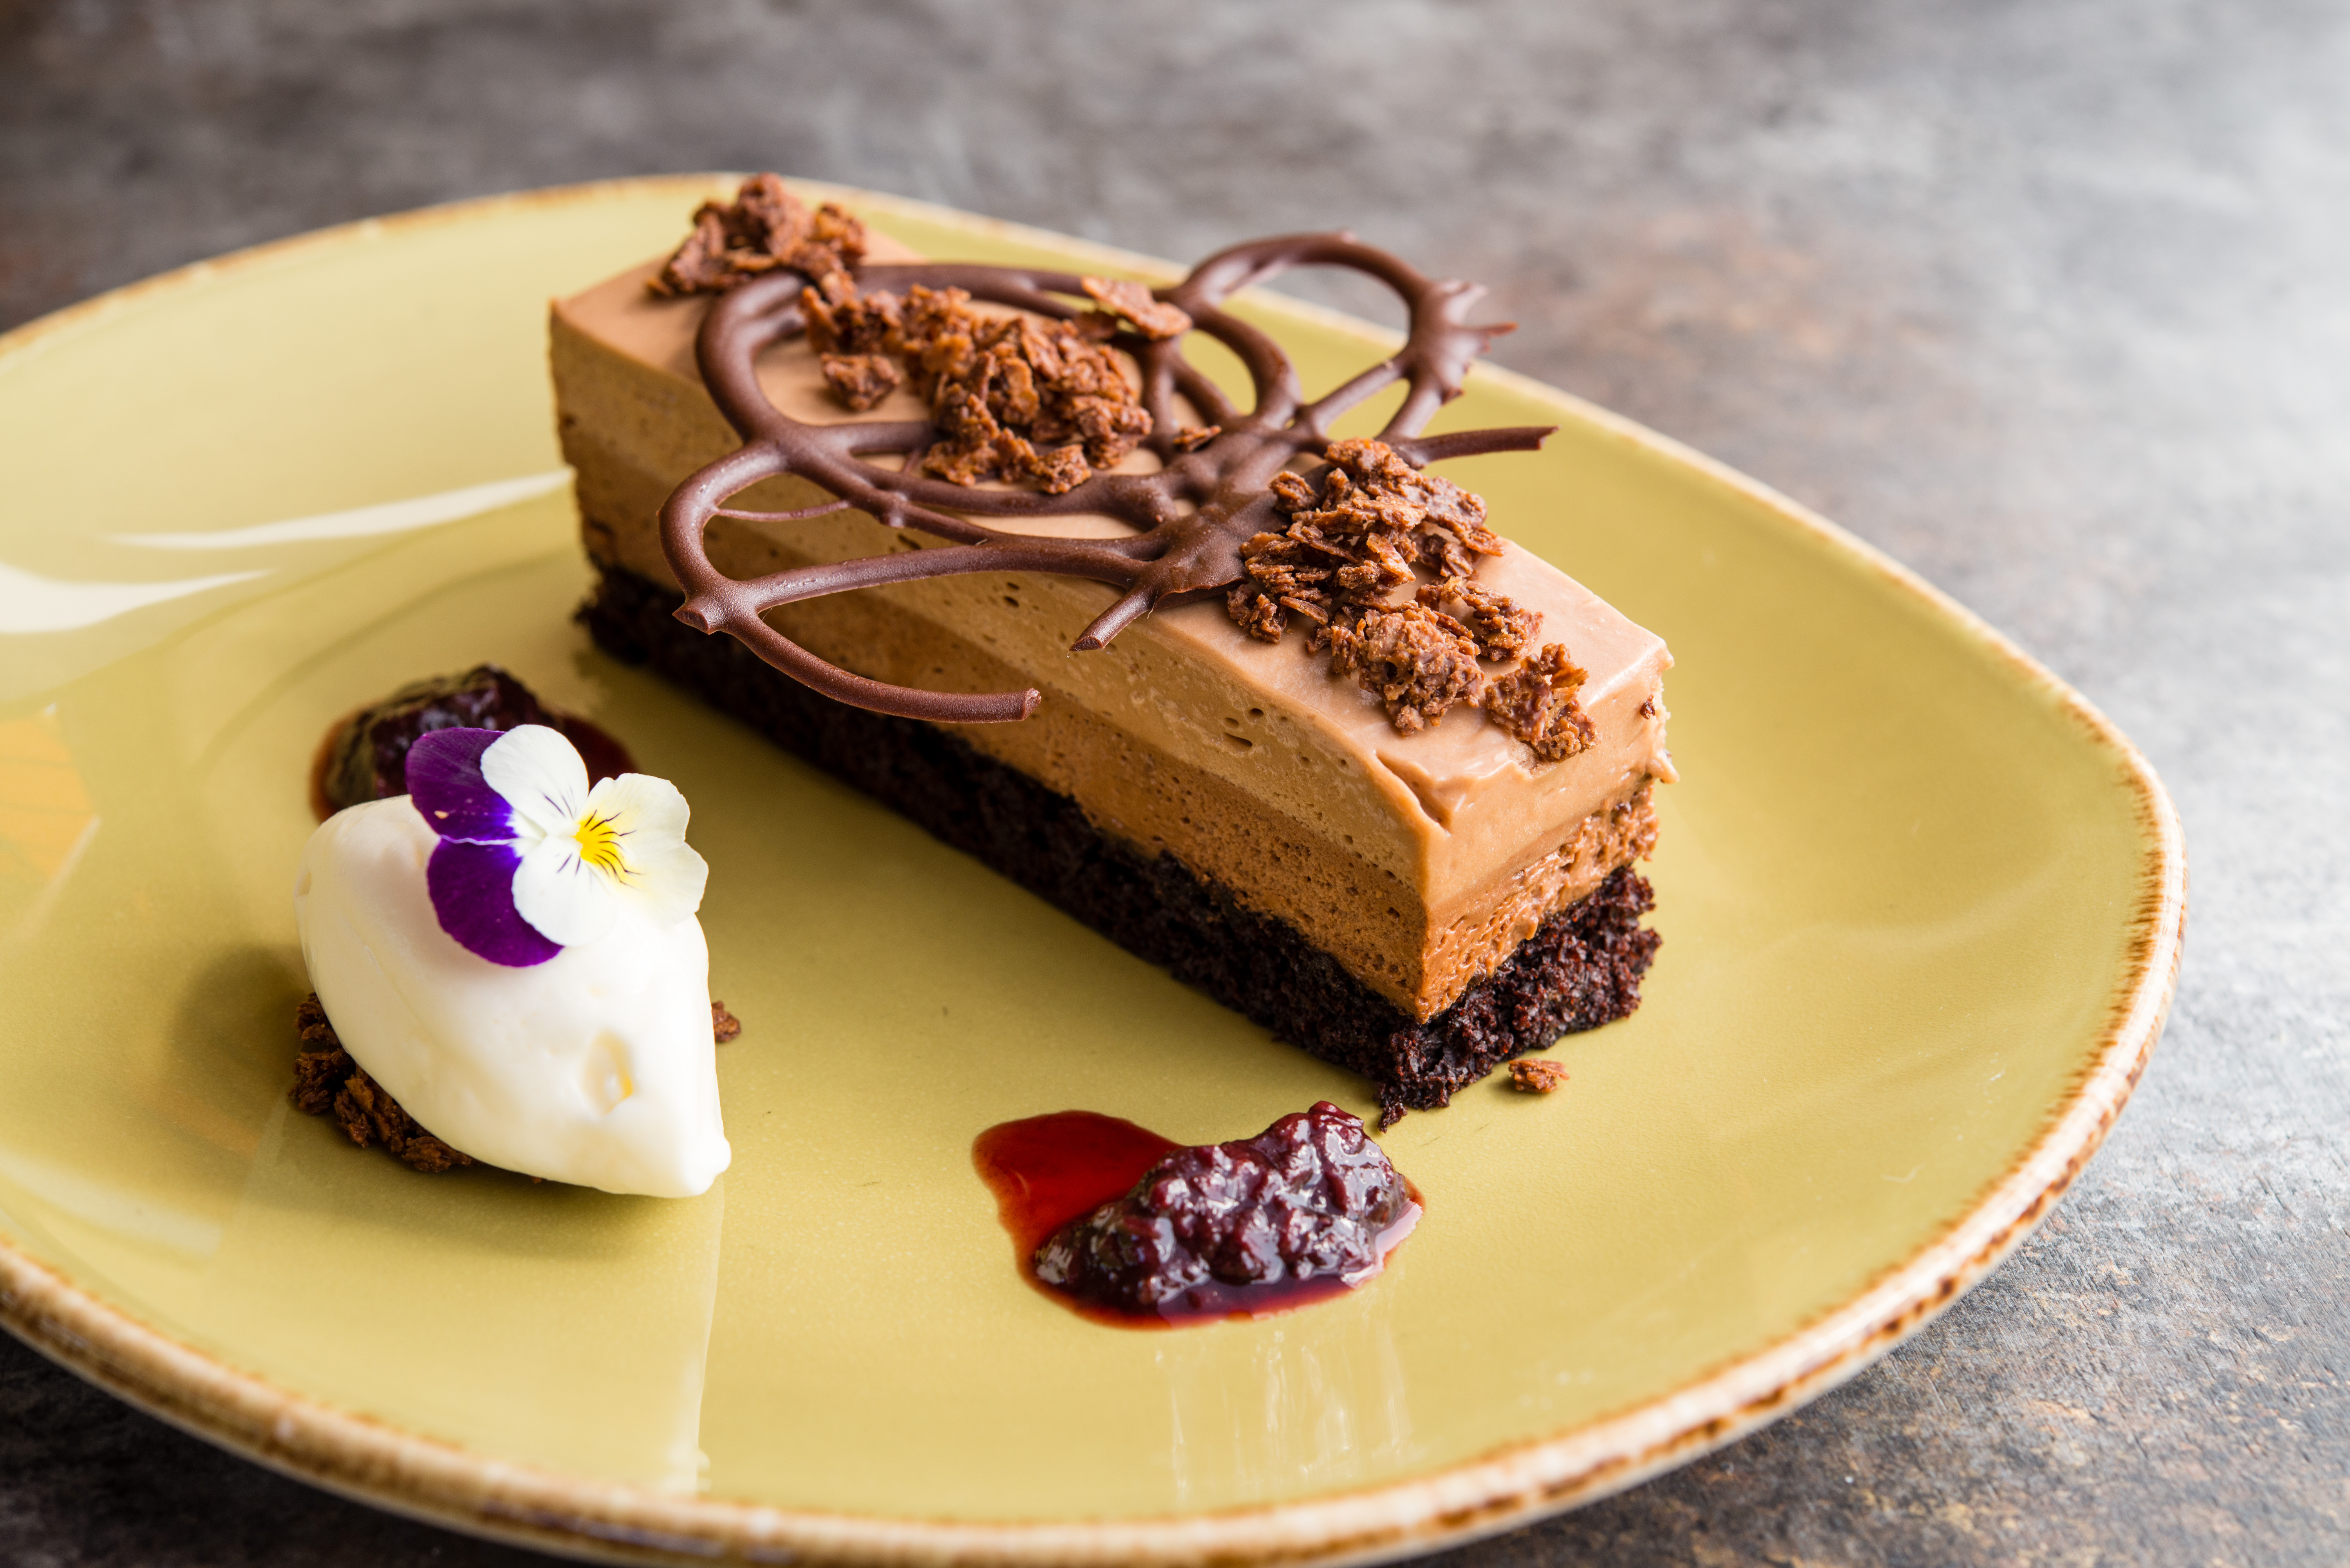 Try the Triple Chocolate Mousse Cake (berries chocolate tuile) for the ultimate sweet treat.